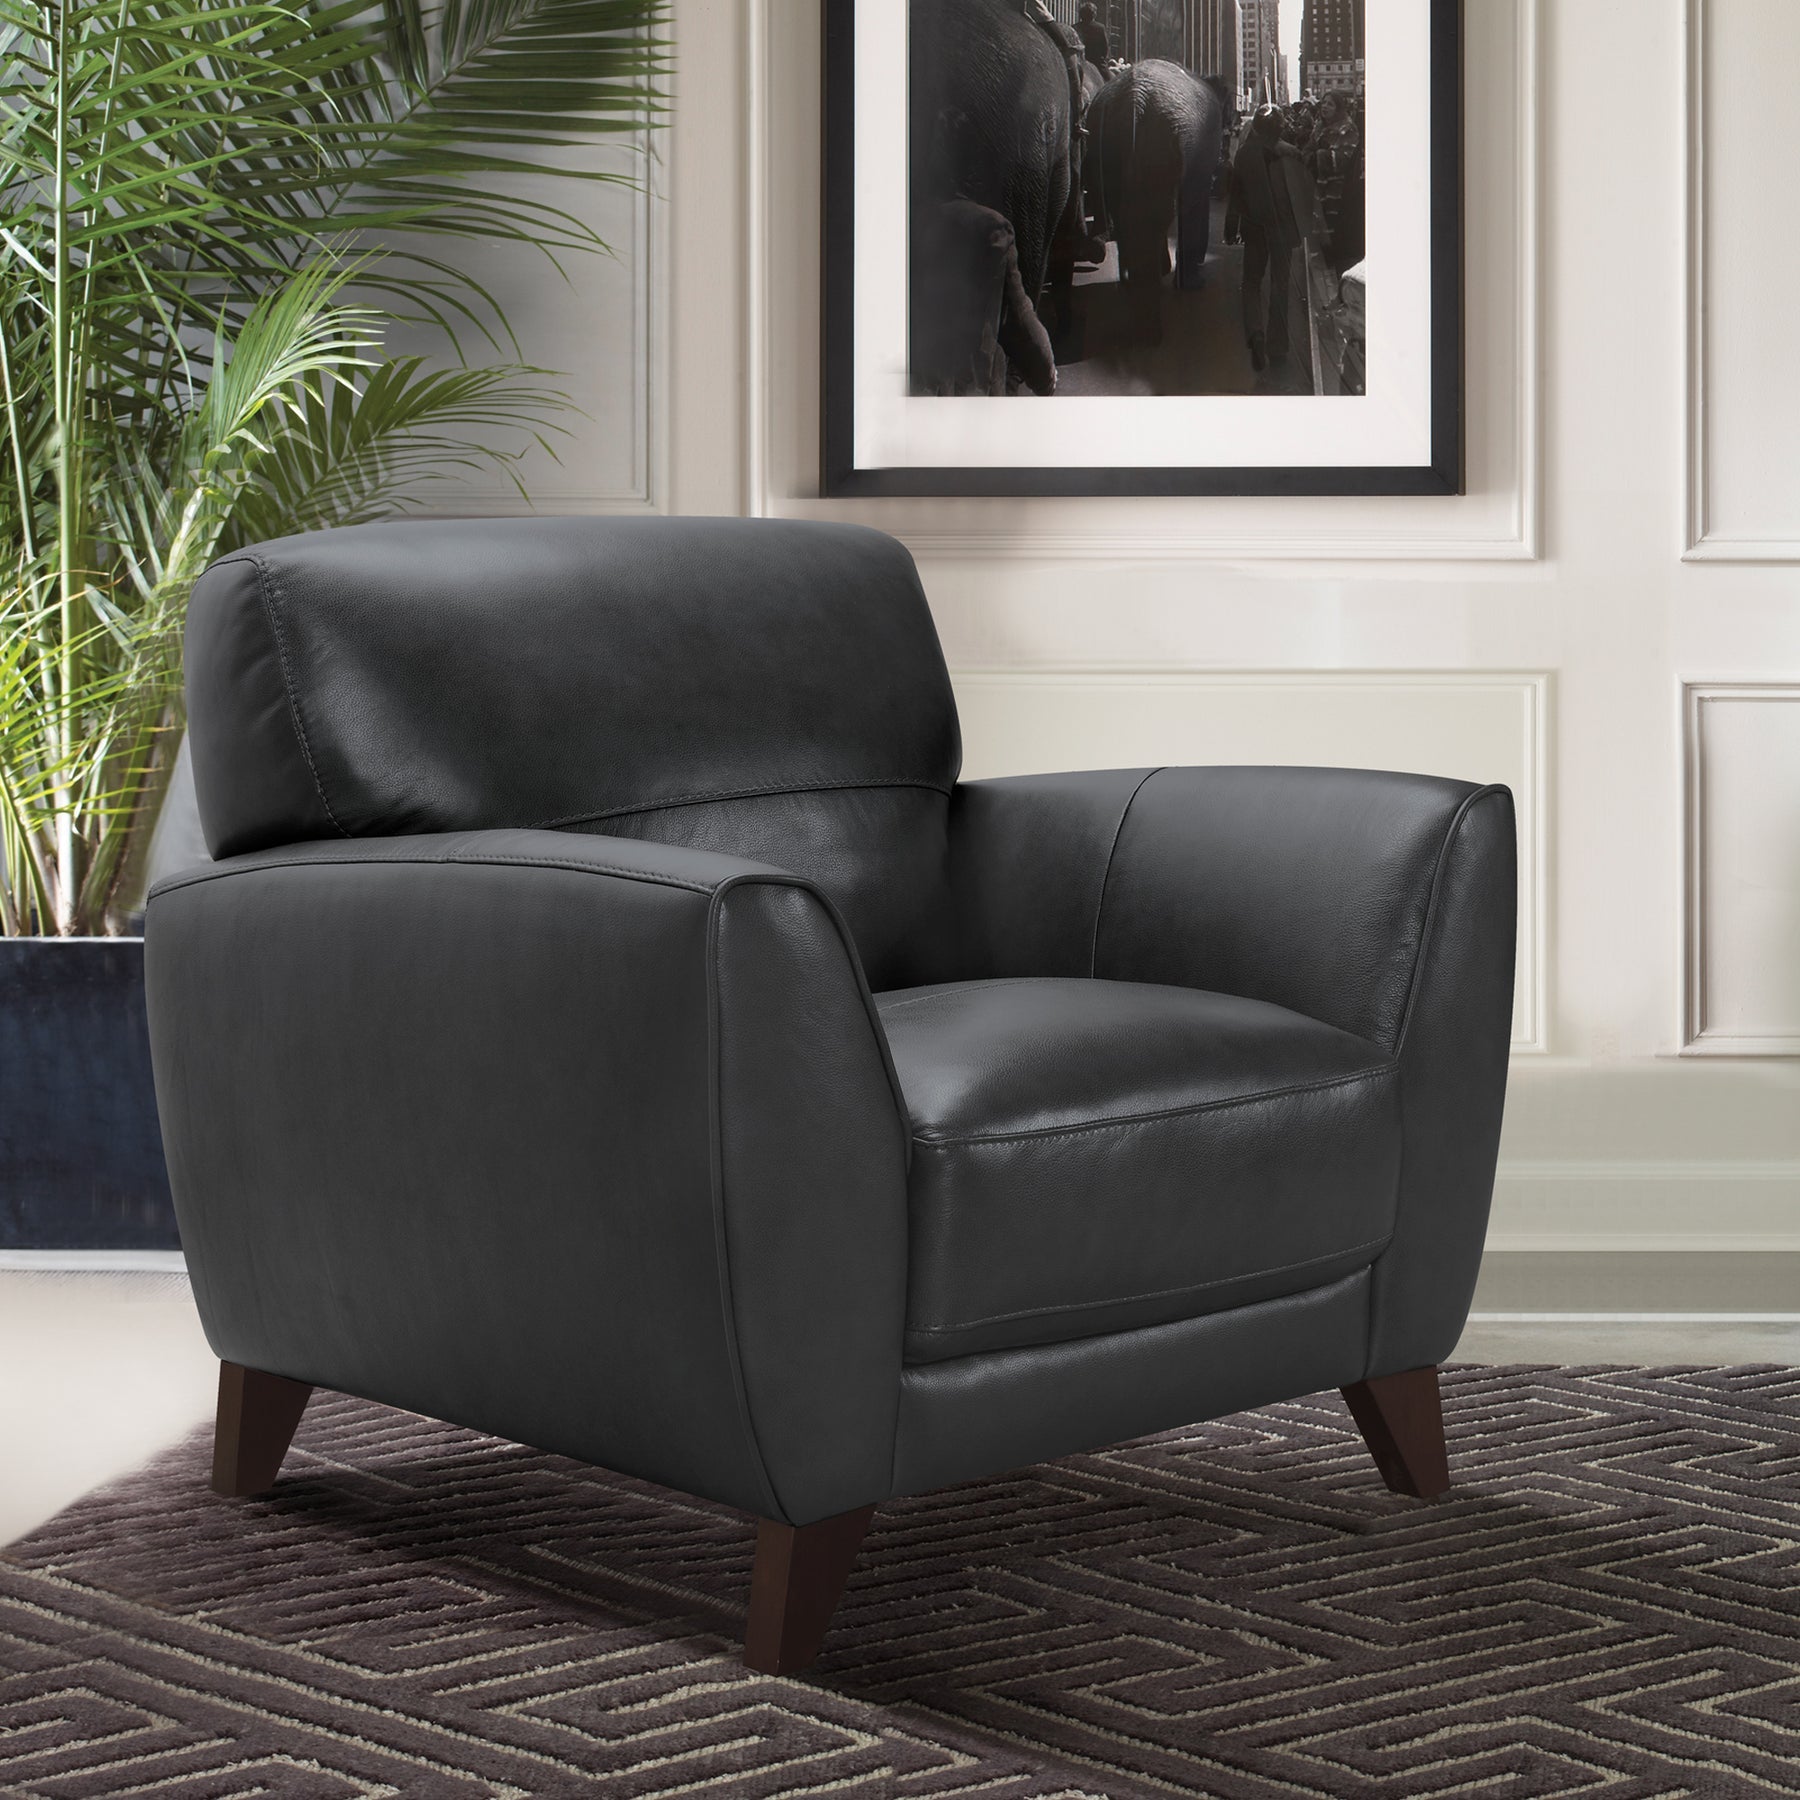 Armen Living Jedd Contemporary Black Leather with Brown Wood Legs, Accent Chair